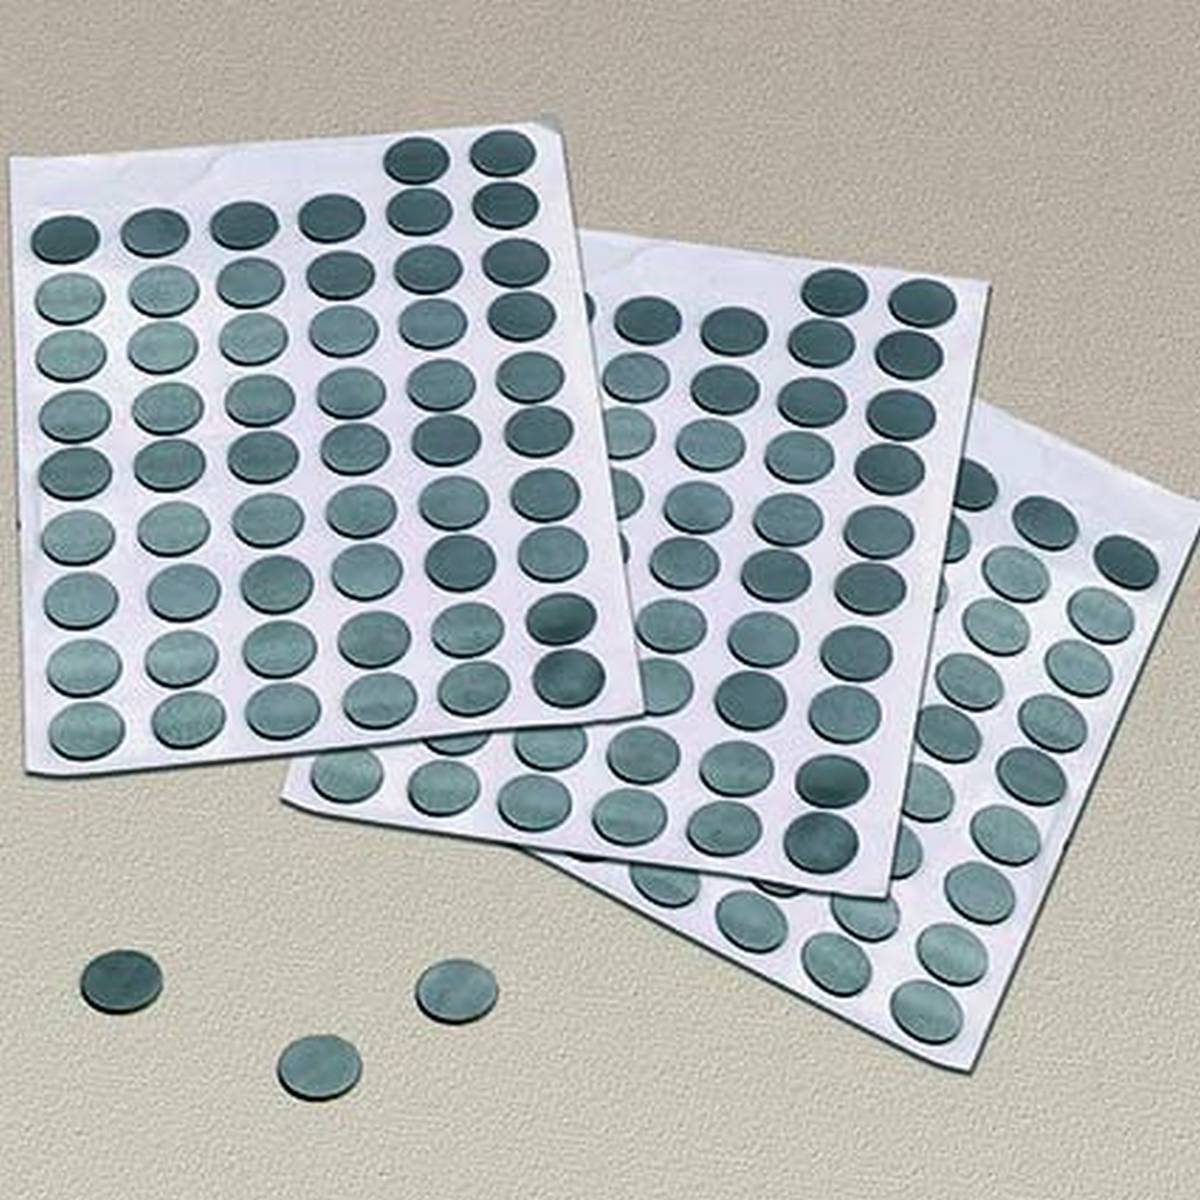 Self-Adhesive Magnetic Dots - Pack of 300